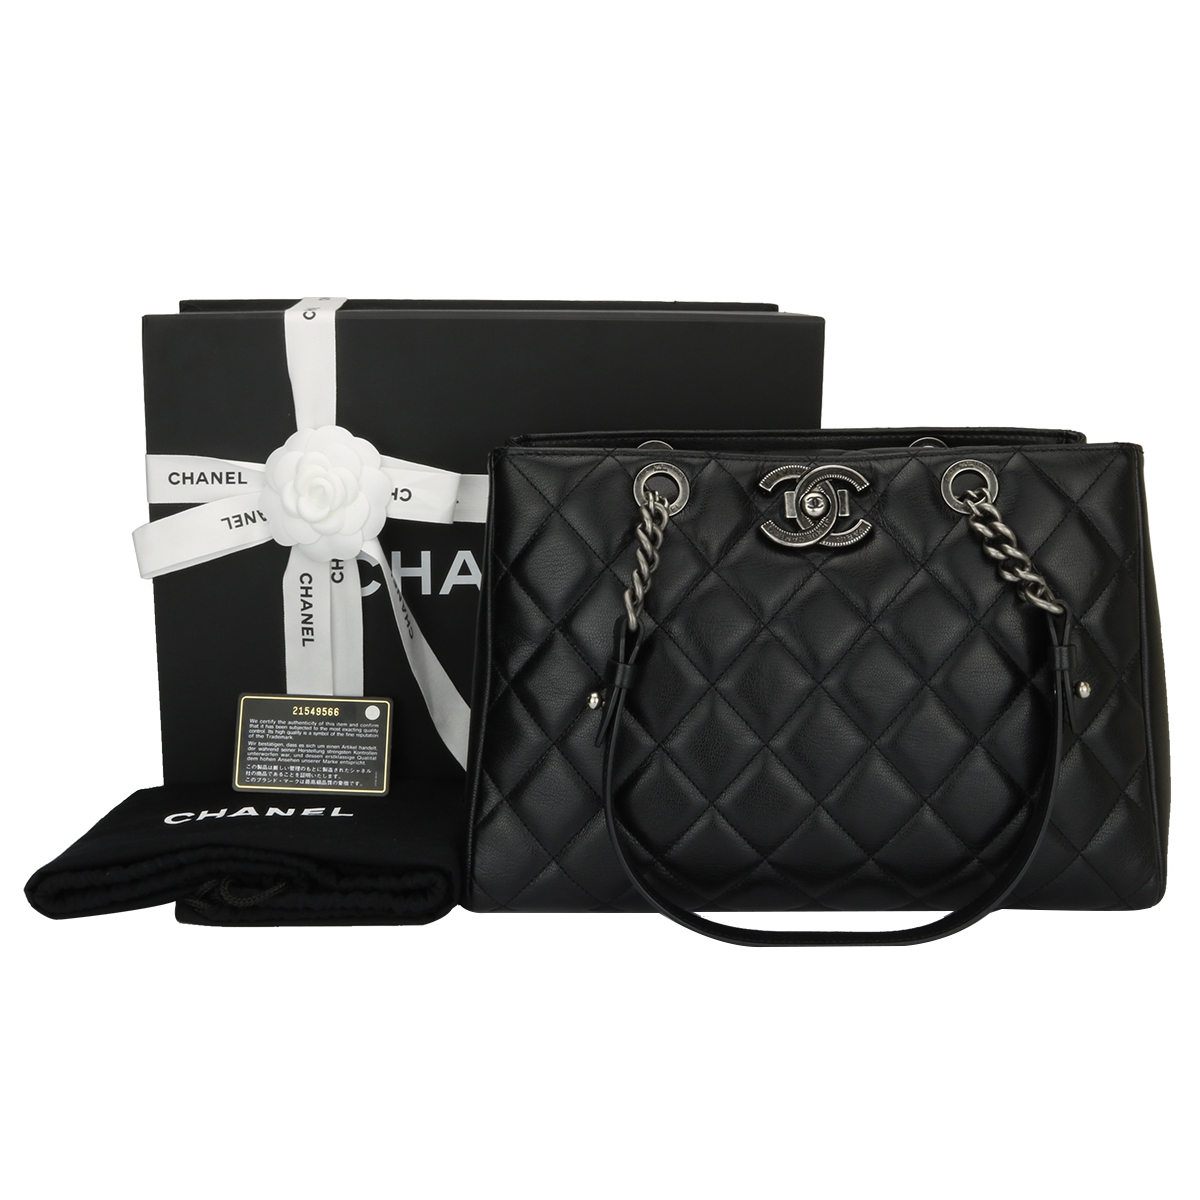 CHANEL Lambskin Quilted Shopping Tote Black 1302936